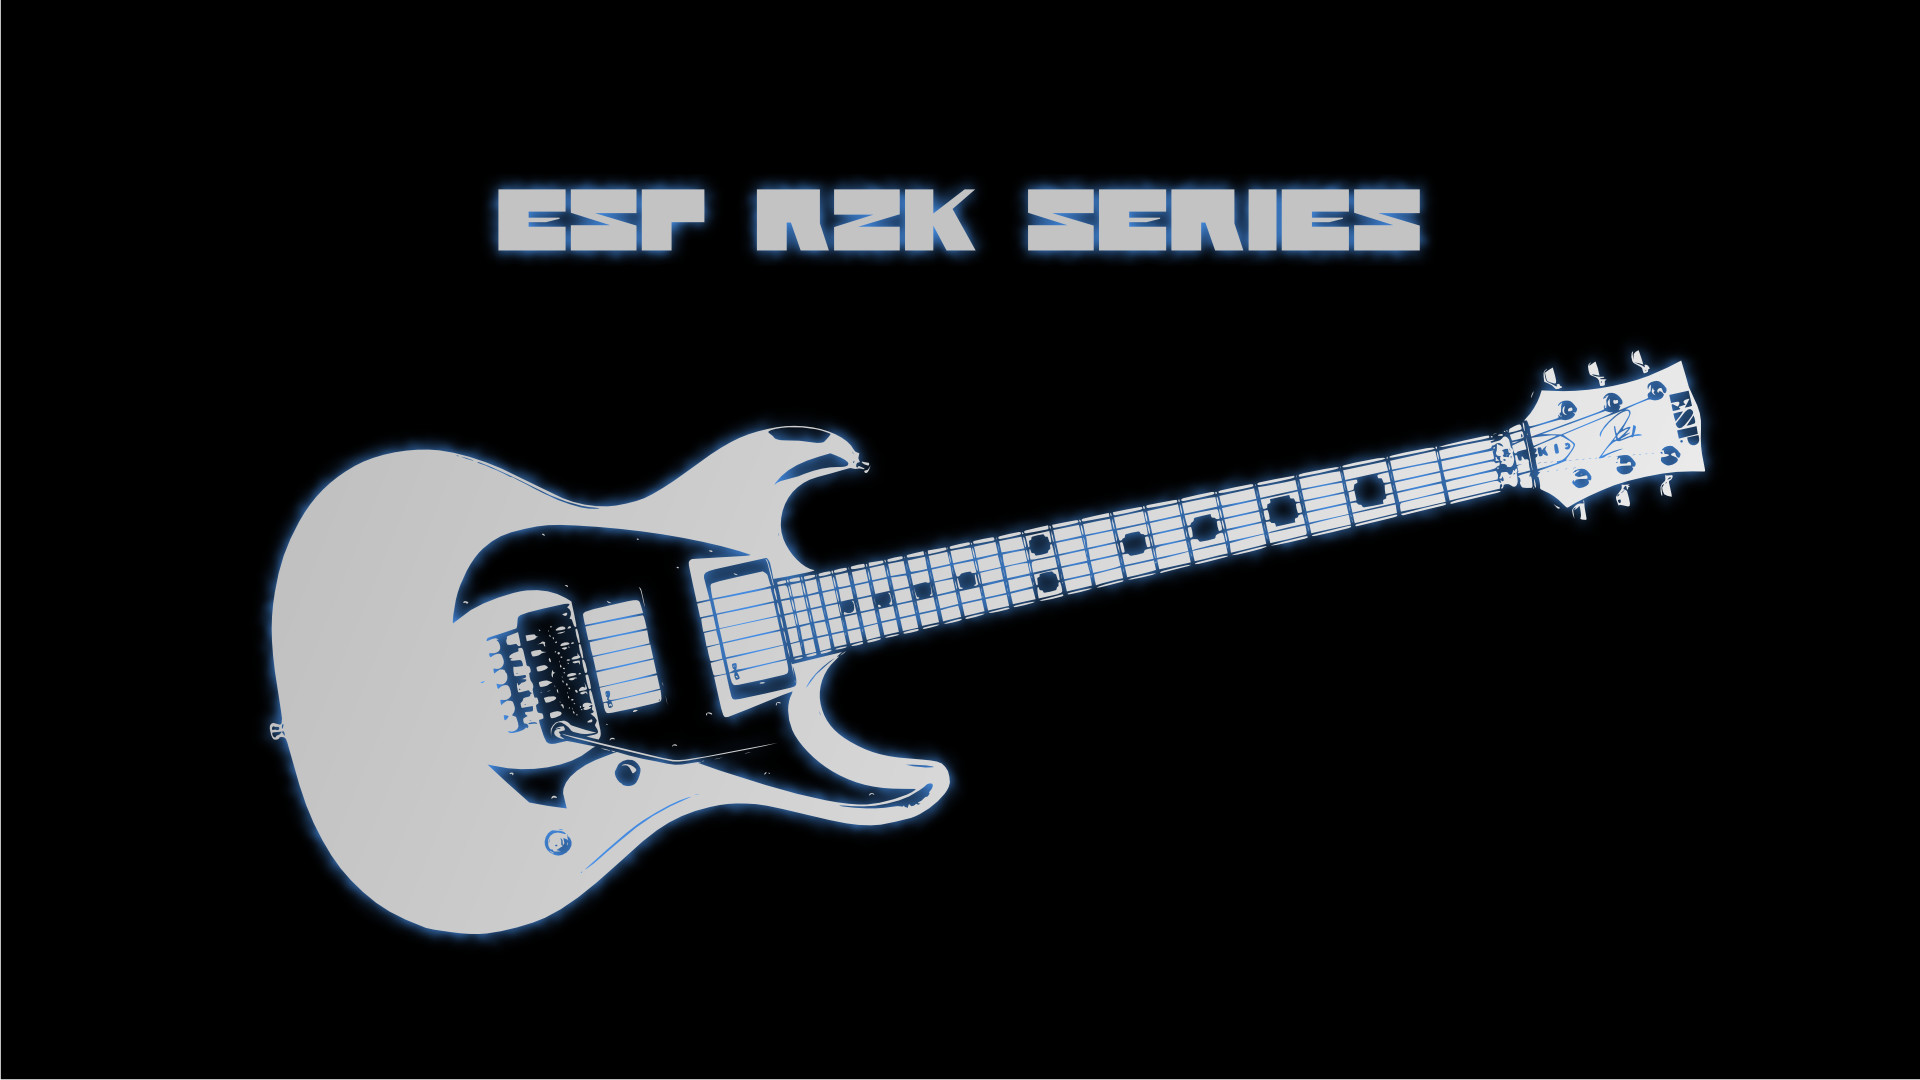 1920x1080 ... RZK 1 Guitar Wallpaper by Like-all